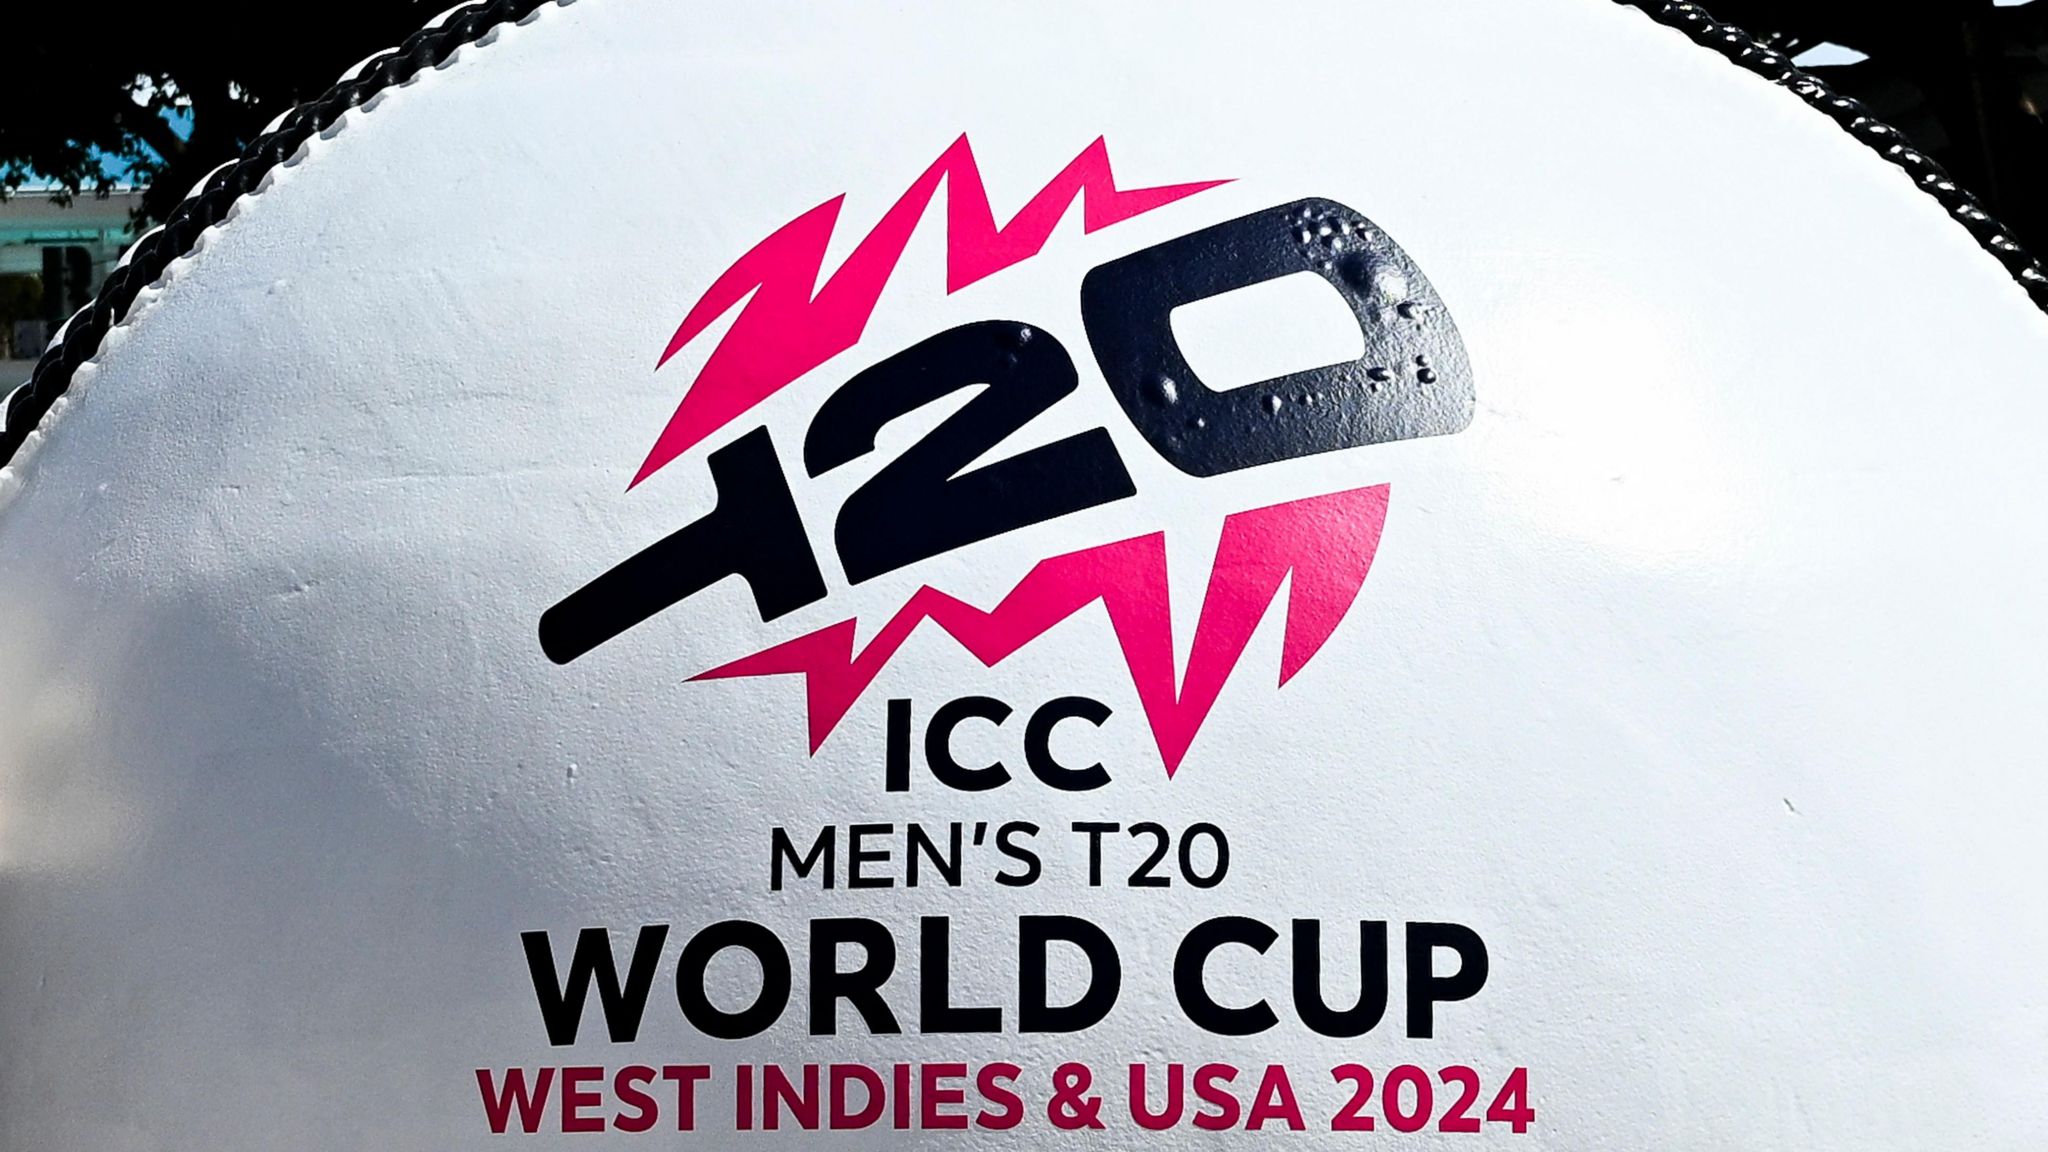 ICC Men's T20 World Cup Format, Groups, Teams, Rules and Previous